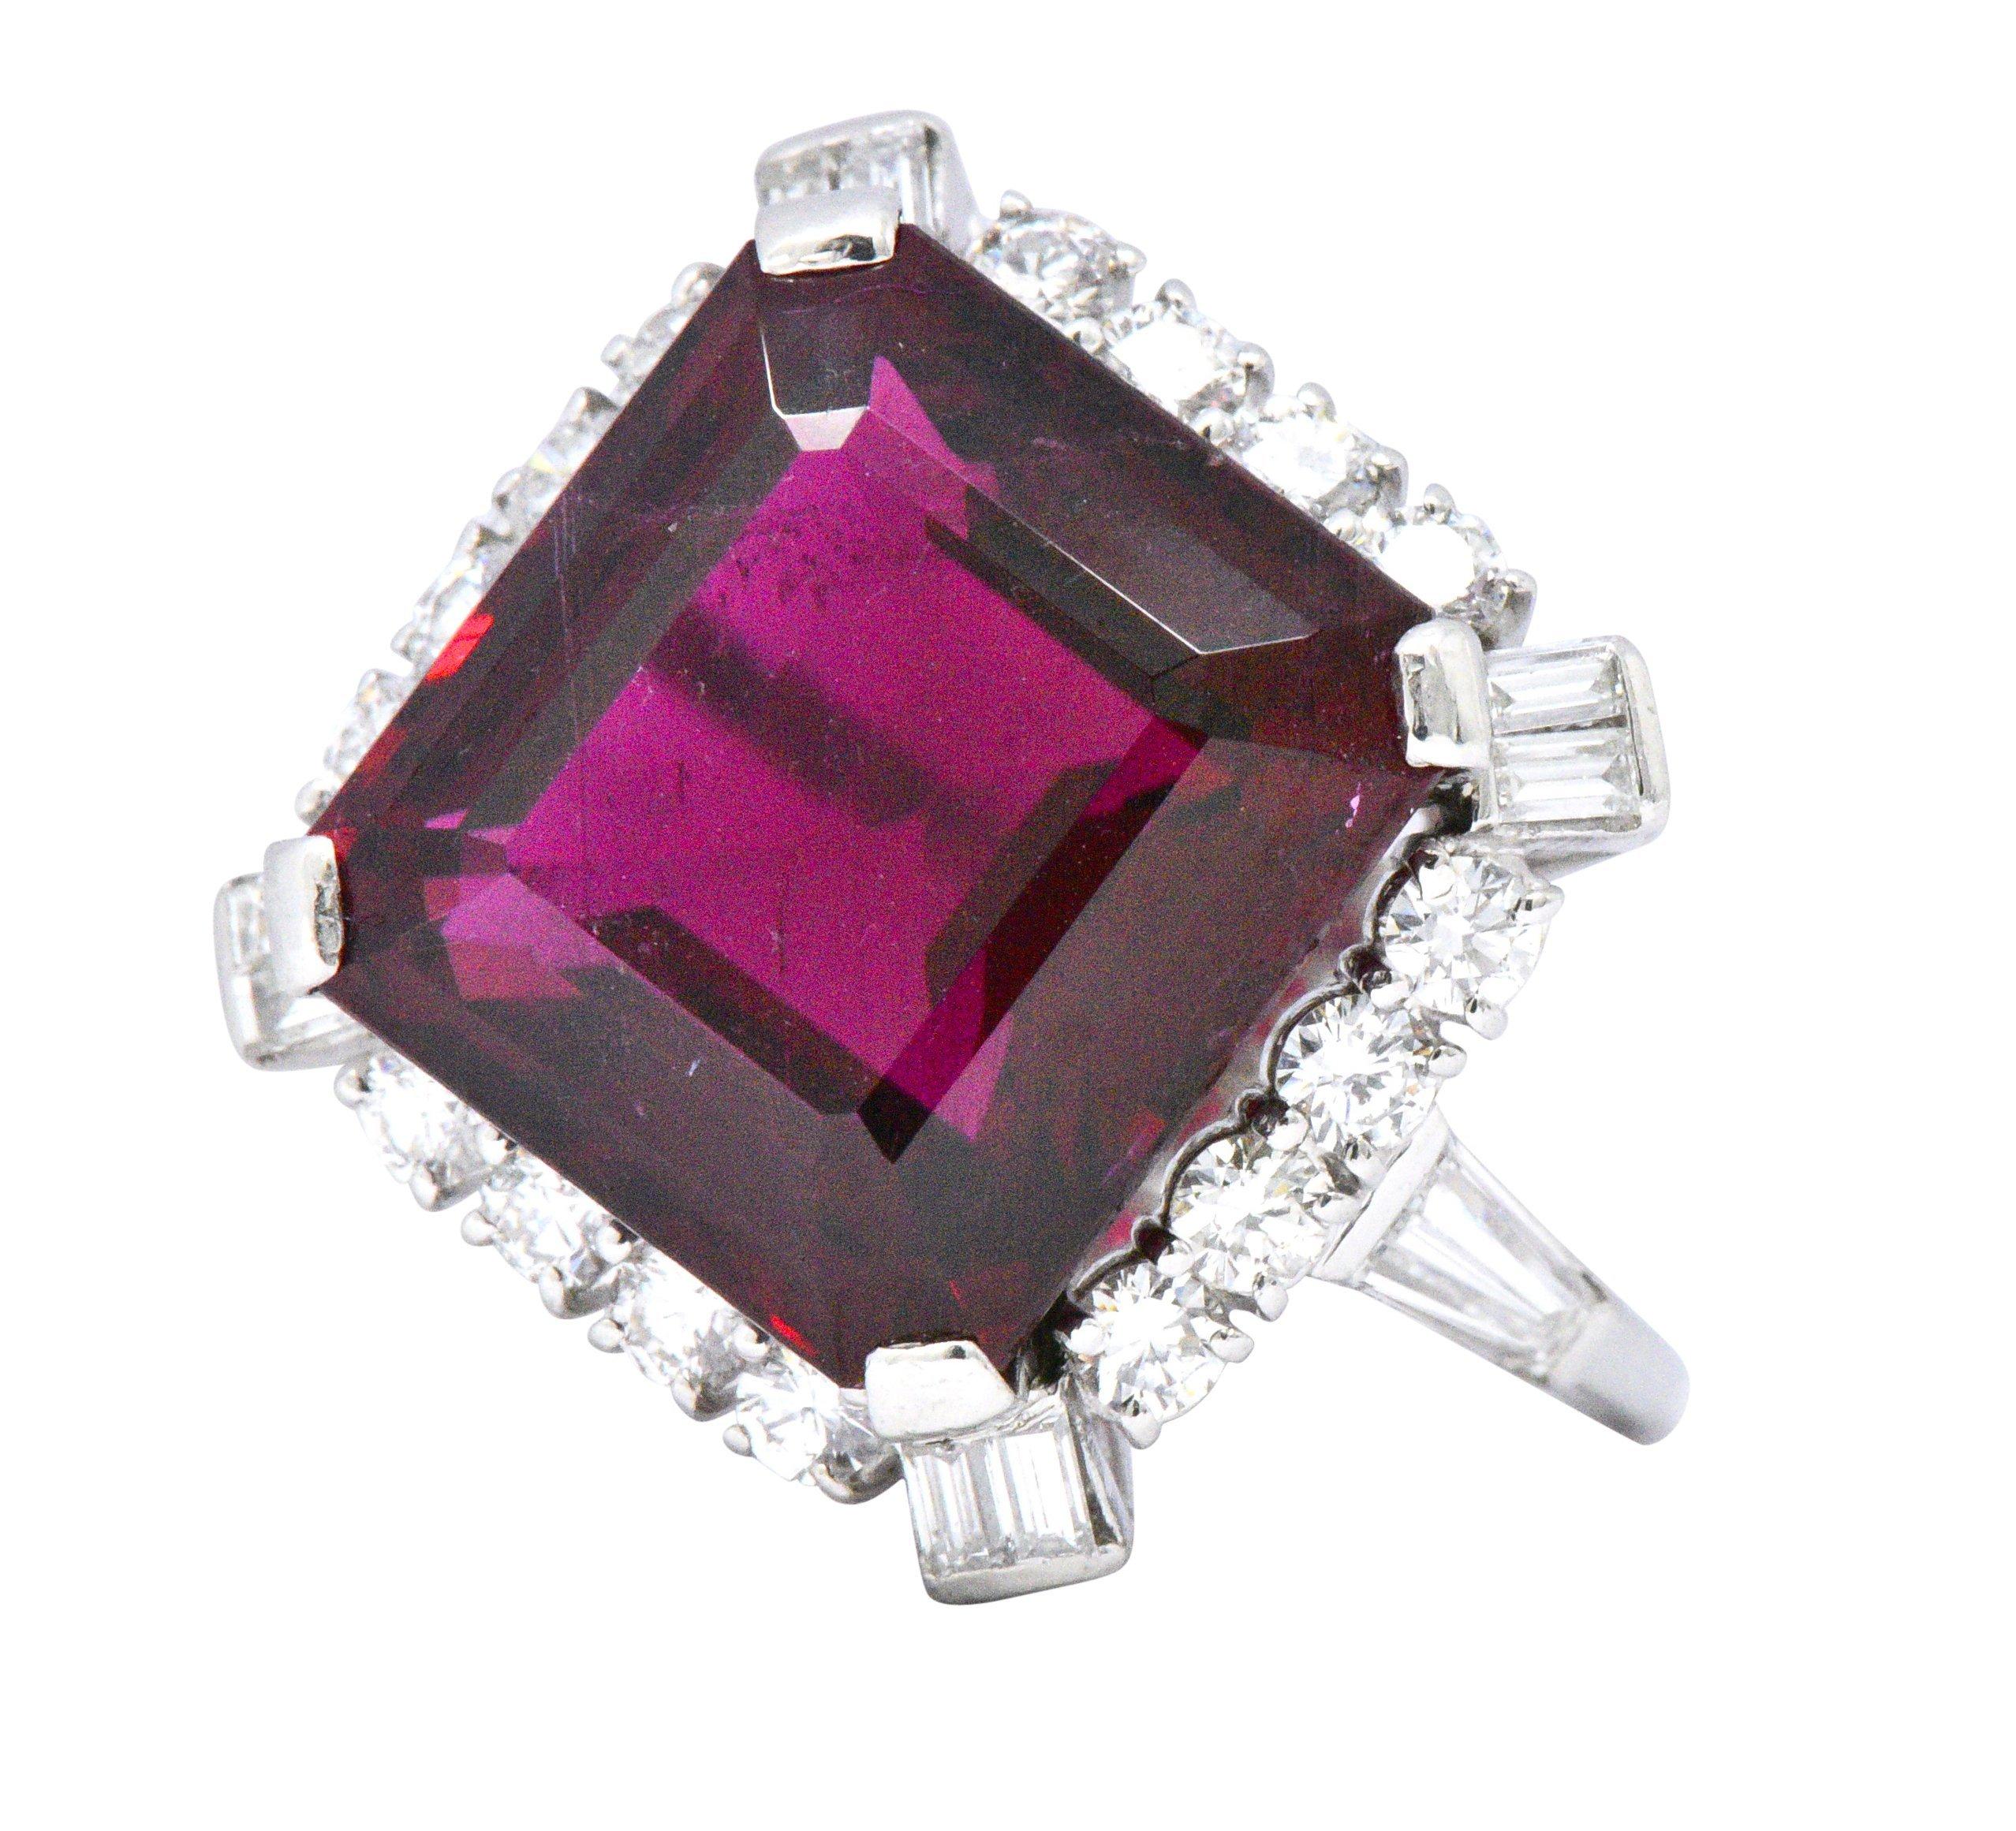 Centering a square cut rubellite tourmaline weighing 11.77 carats with a deep burgundy color

Encompassing center stone are round and baguette cut diamonds weighing 1.60 CTW, F-G color and VS clarity

Tested as platinum and circa 1950

Top measures